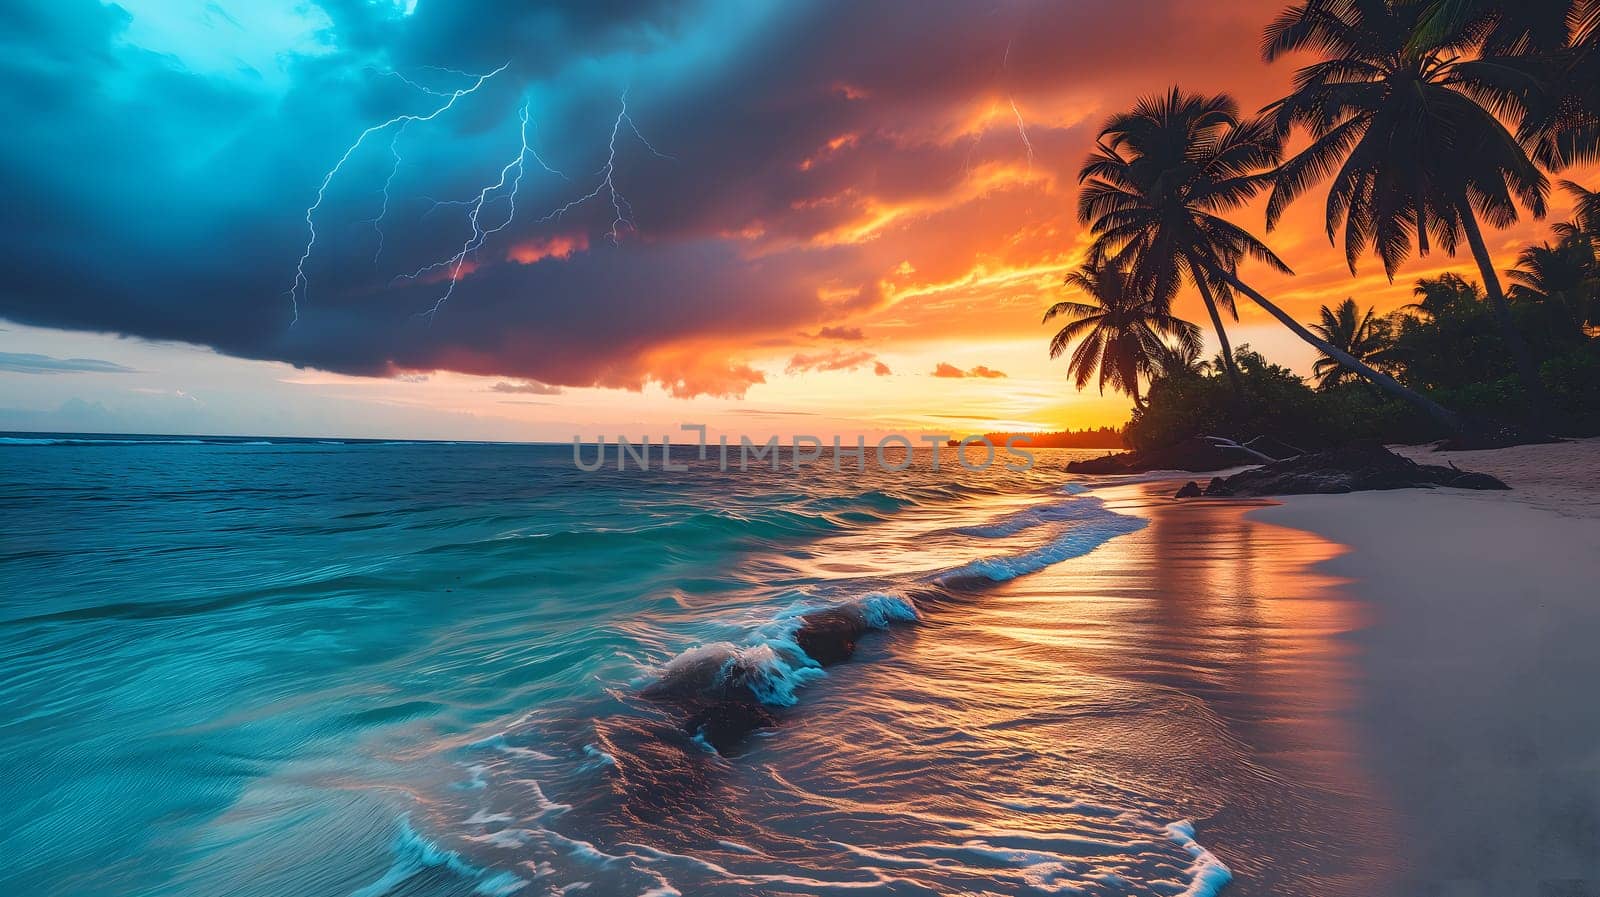 tropical beach view at cloudy stormy sunset with white sand, turquoise water and palm trees. Neural network generated image. Not based on any actual scene or pattern.